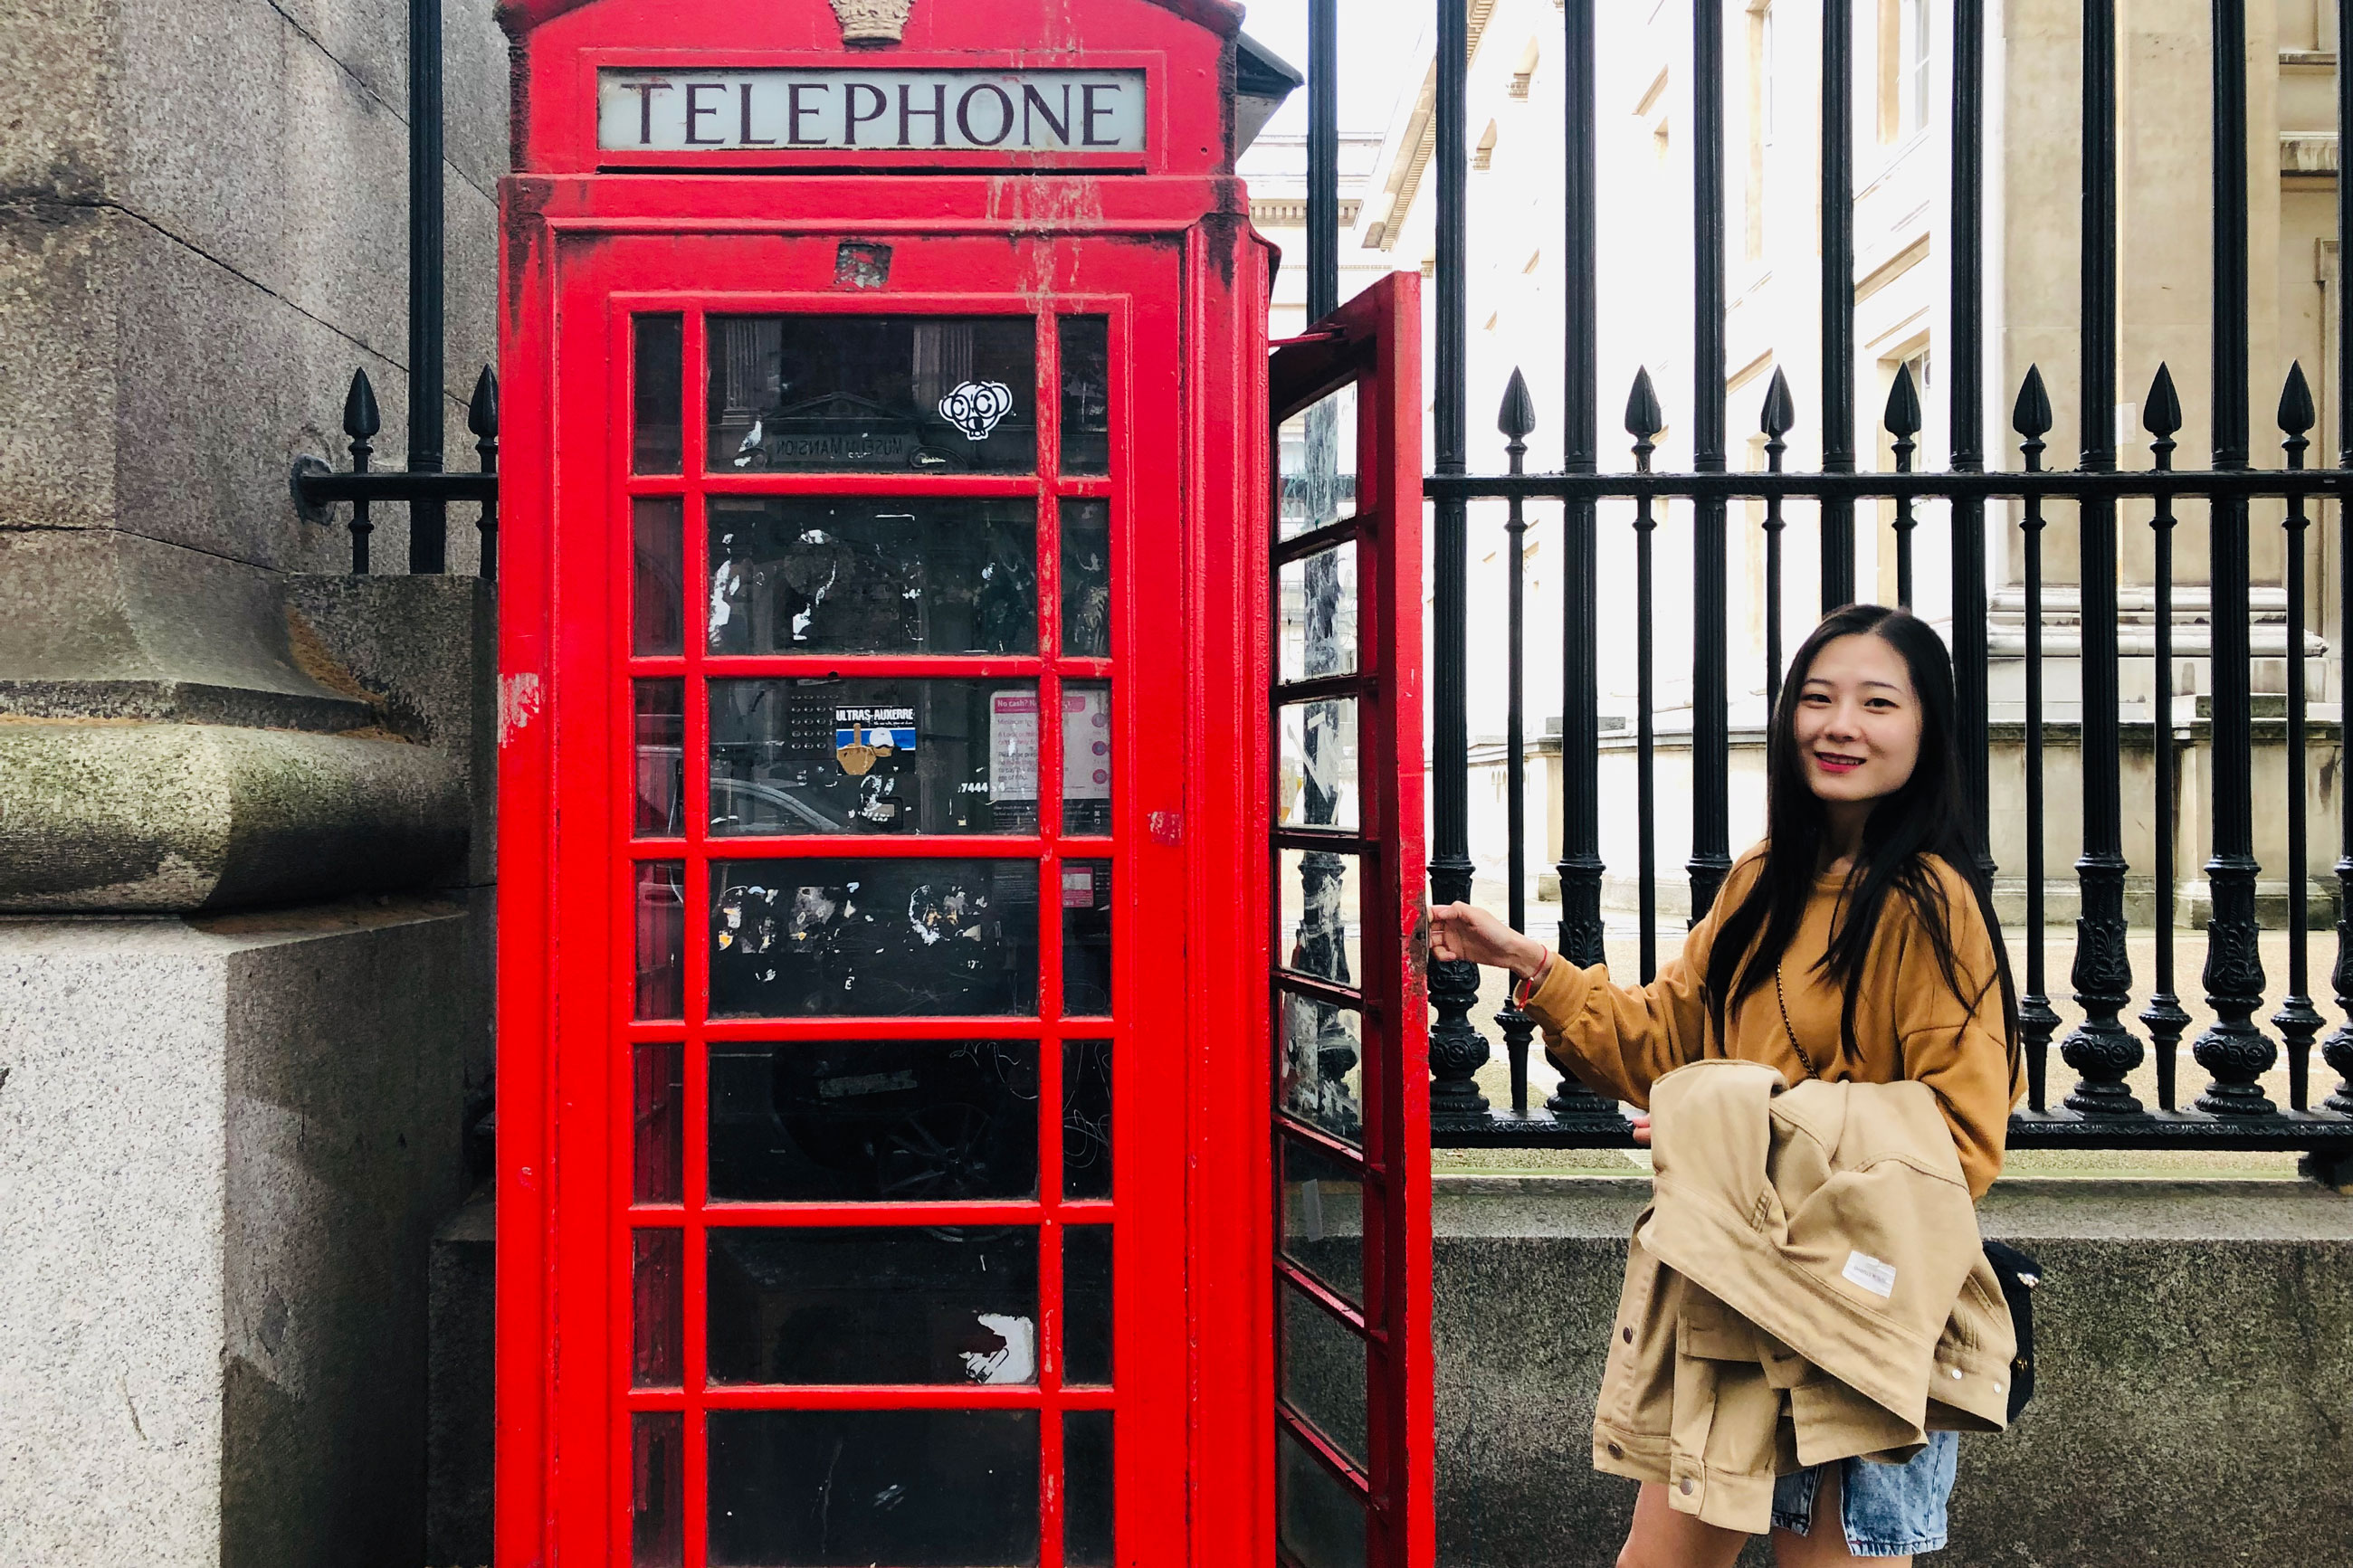 A student posing next to a phone booth.